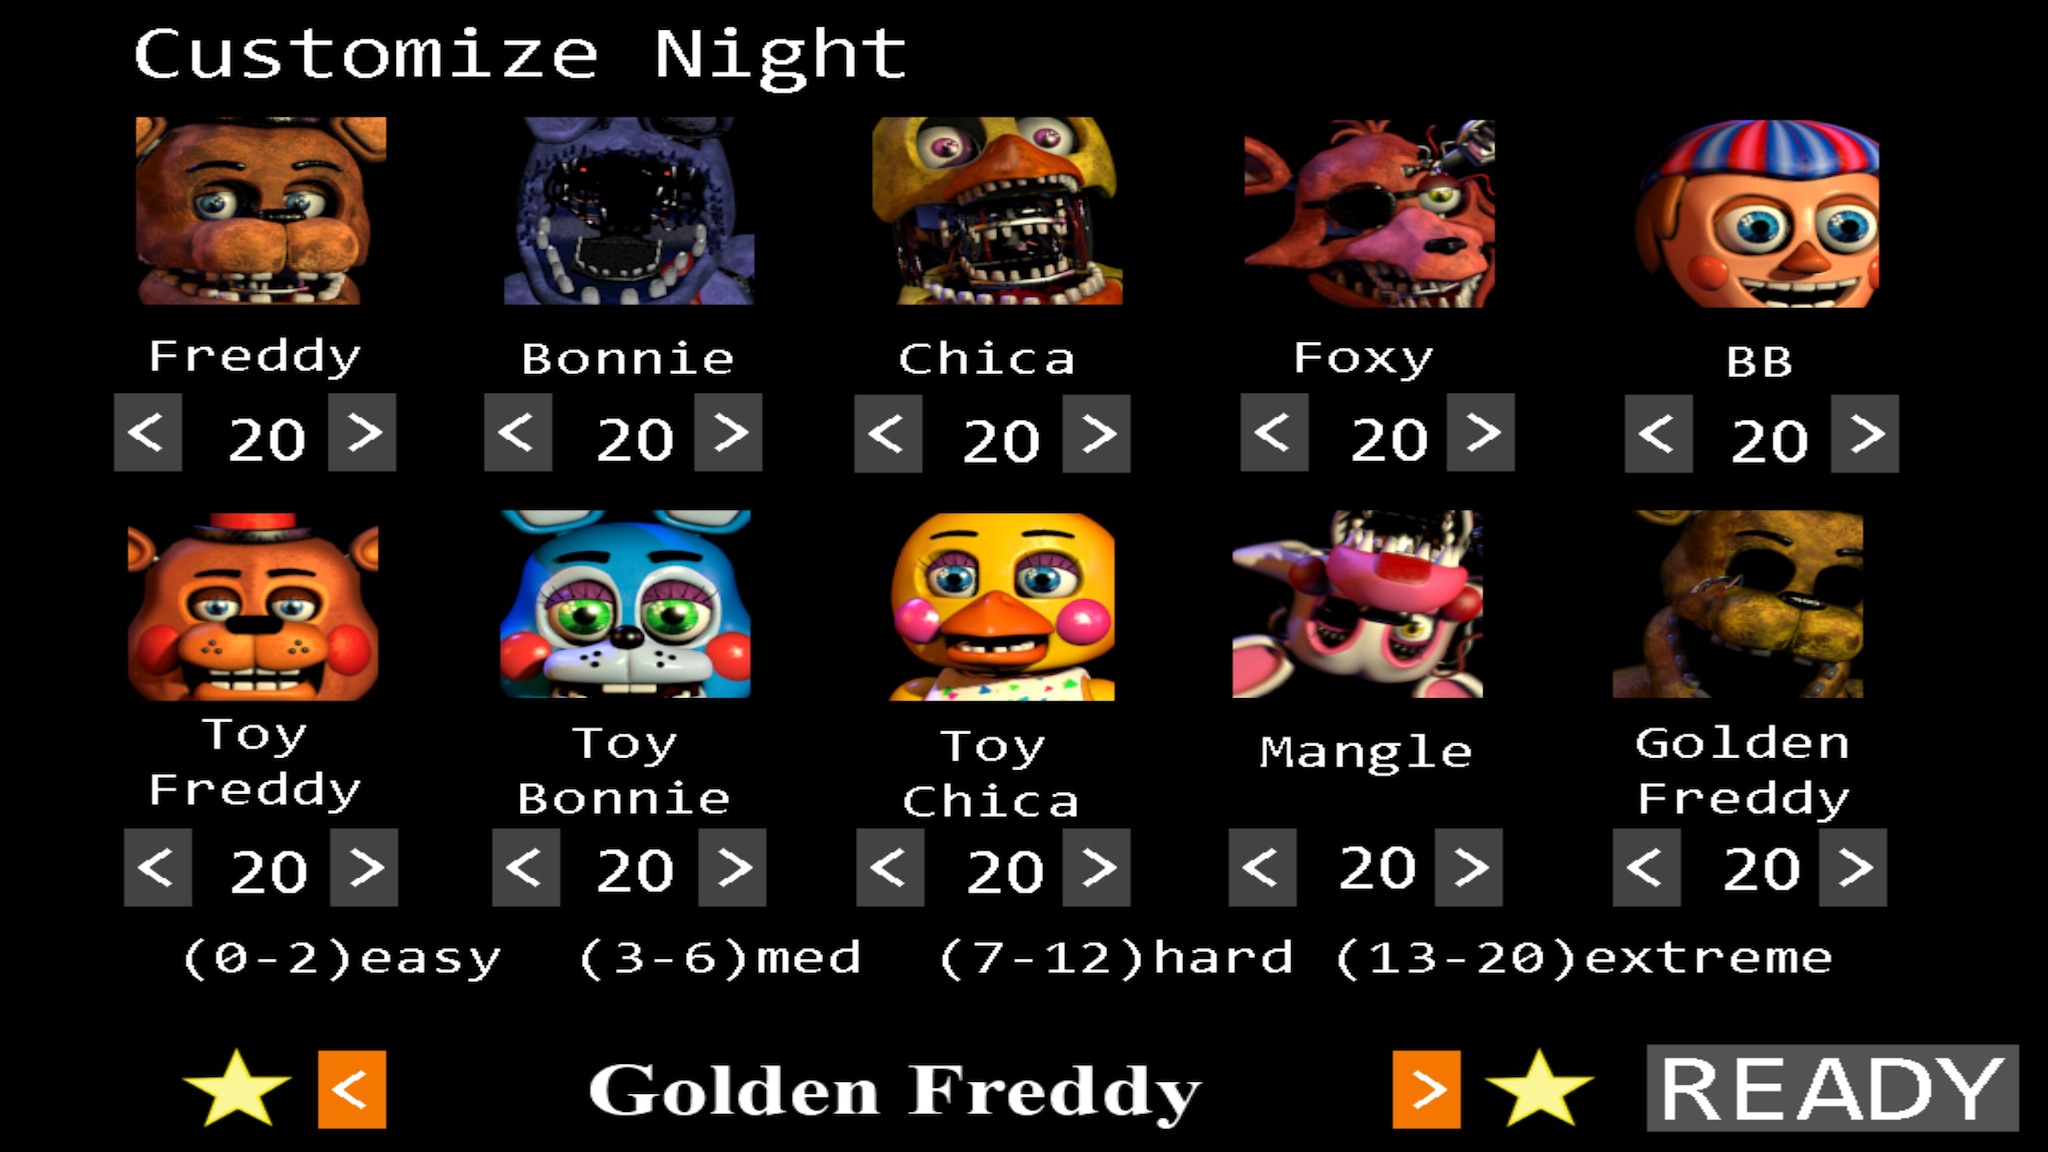 BONNIE AND CHICA ARE BACK!  Five Nights at Freddy's 2 - Part 2 